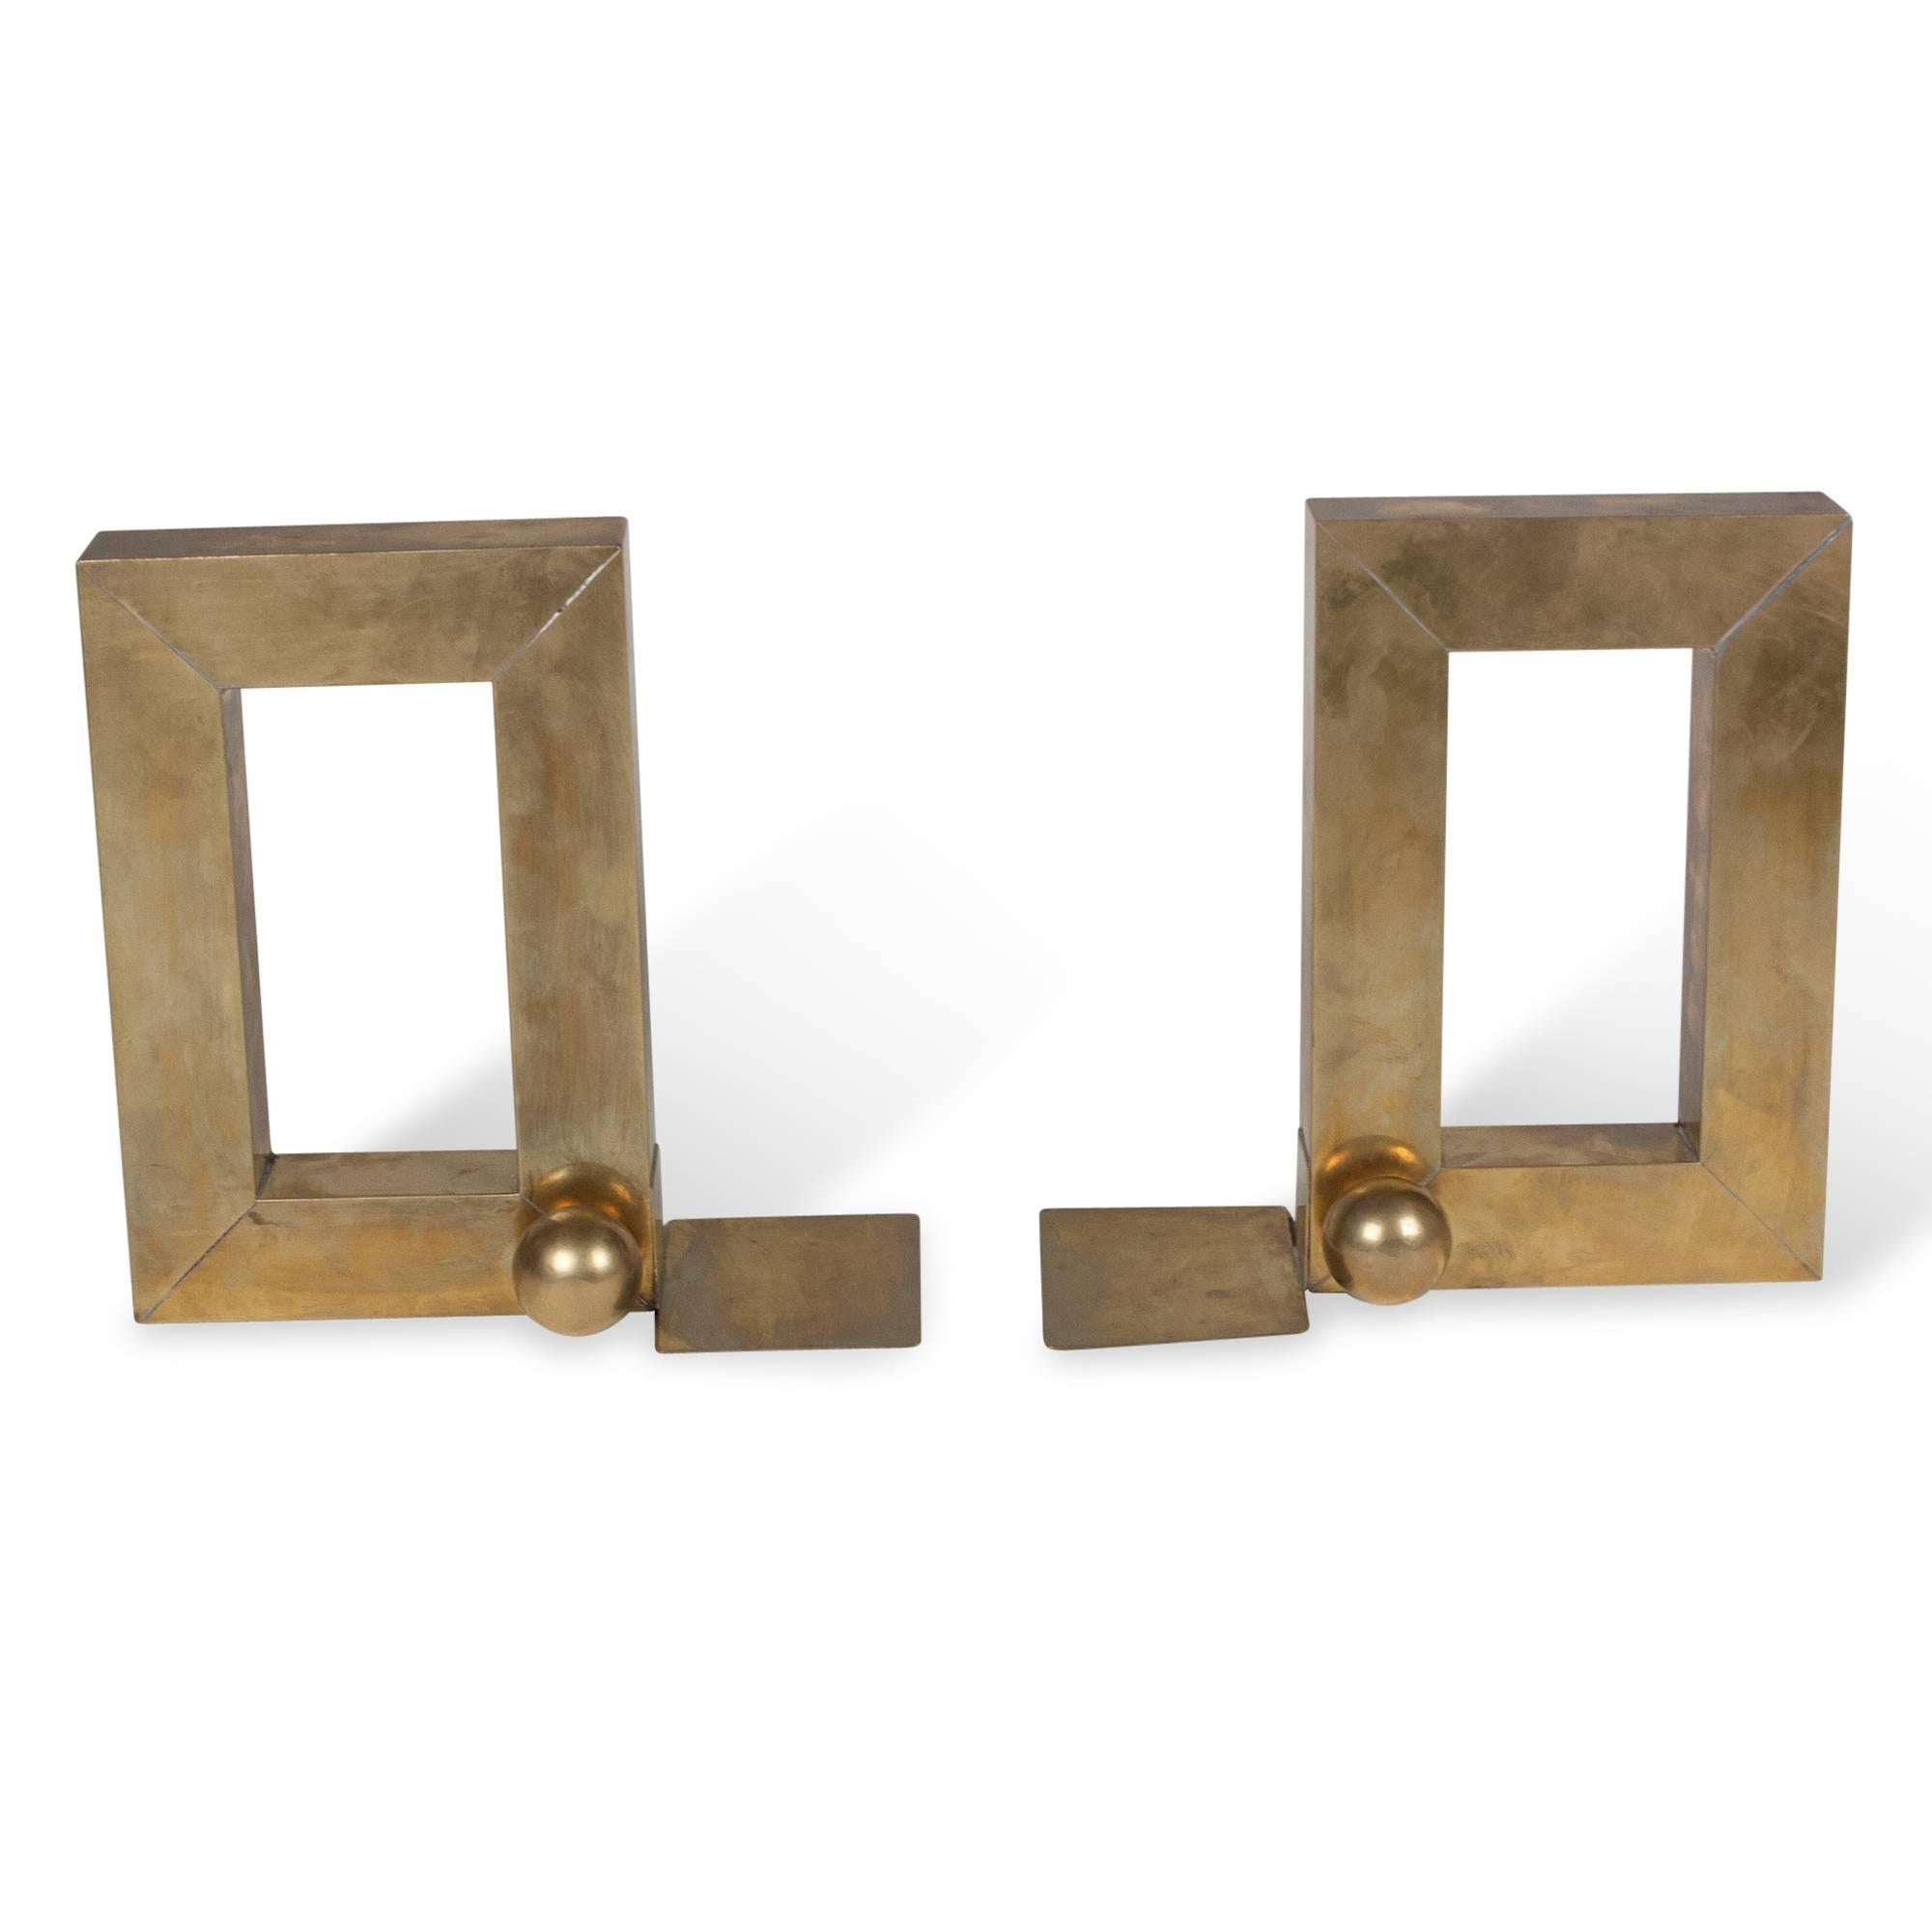 Pair of open rectangular shape brass bookends, with large ball accents at the base, United States, 1930s. Measures: 6 in x 9 in, width of body 1 1/2 in, overall width 4 in. 